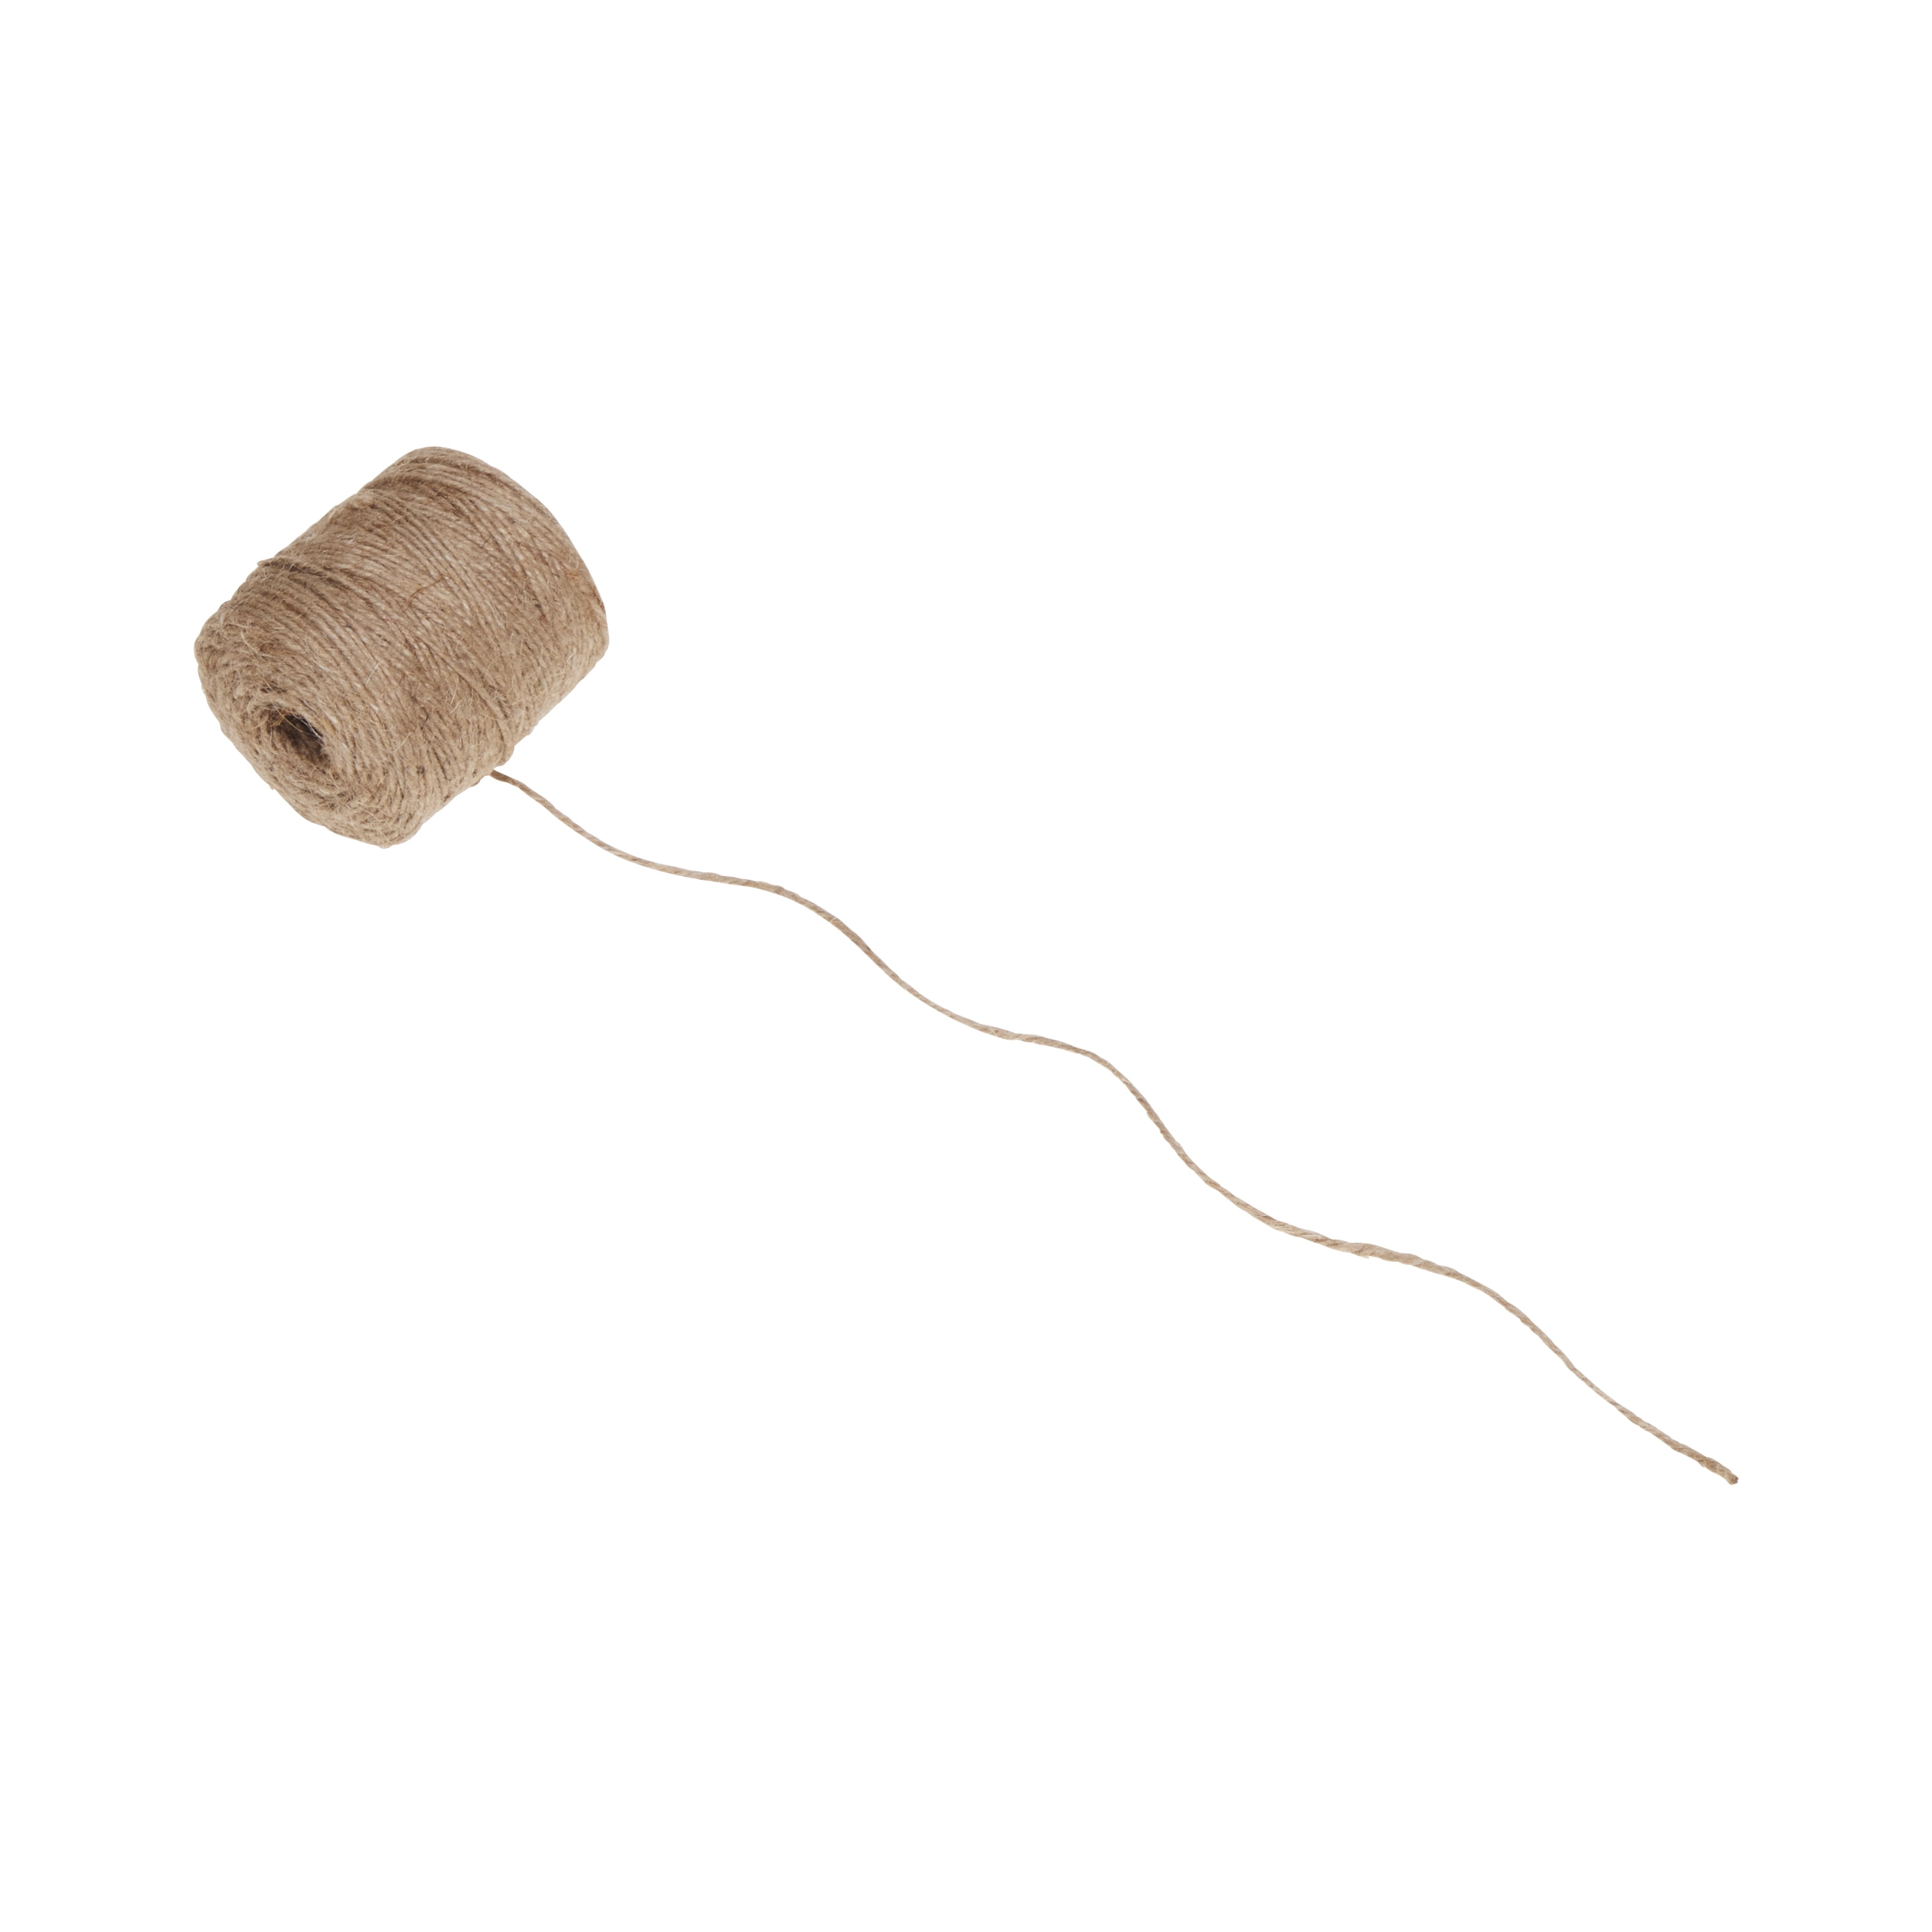 Jute Twine - 3 Ply Brown Roll 243' Jute Twine for Crafts - Soft Yet Strong  Natural Jute String, Burlap String, Wrapping, Packing Materials, Decorative